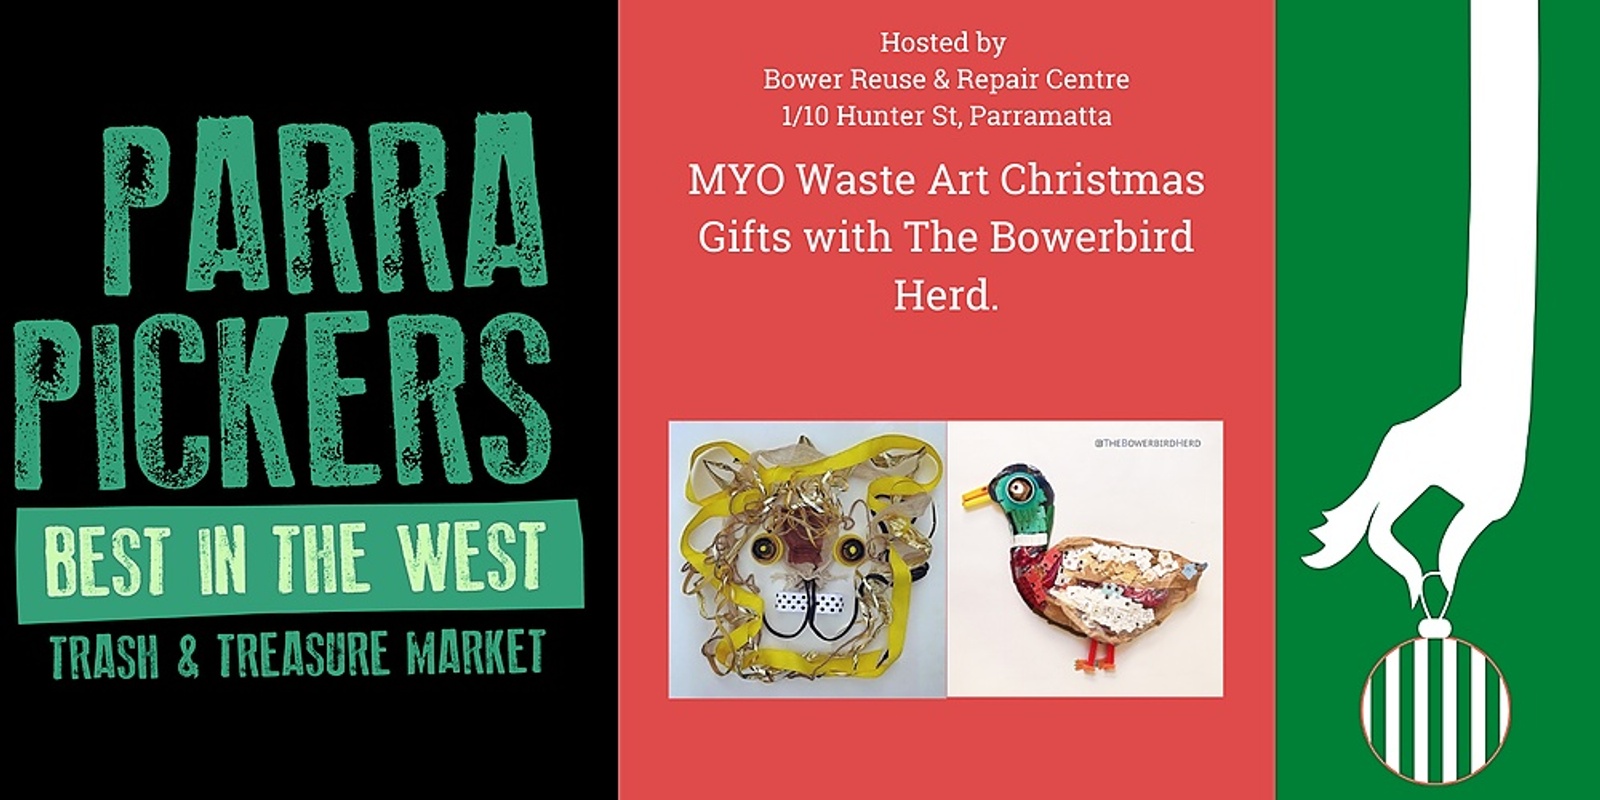 Banner image for Parra Pickers & The Bower Present - MYO Waste Art Christmas Gifts with The Bowerbird Herd - Free Workshop